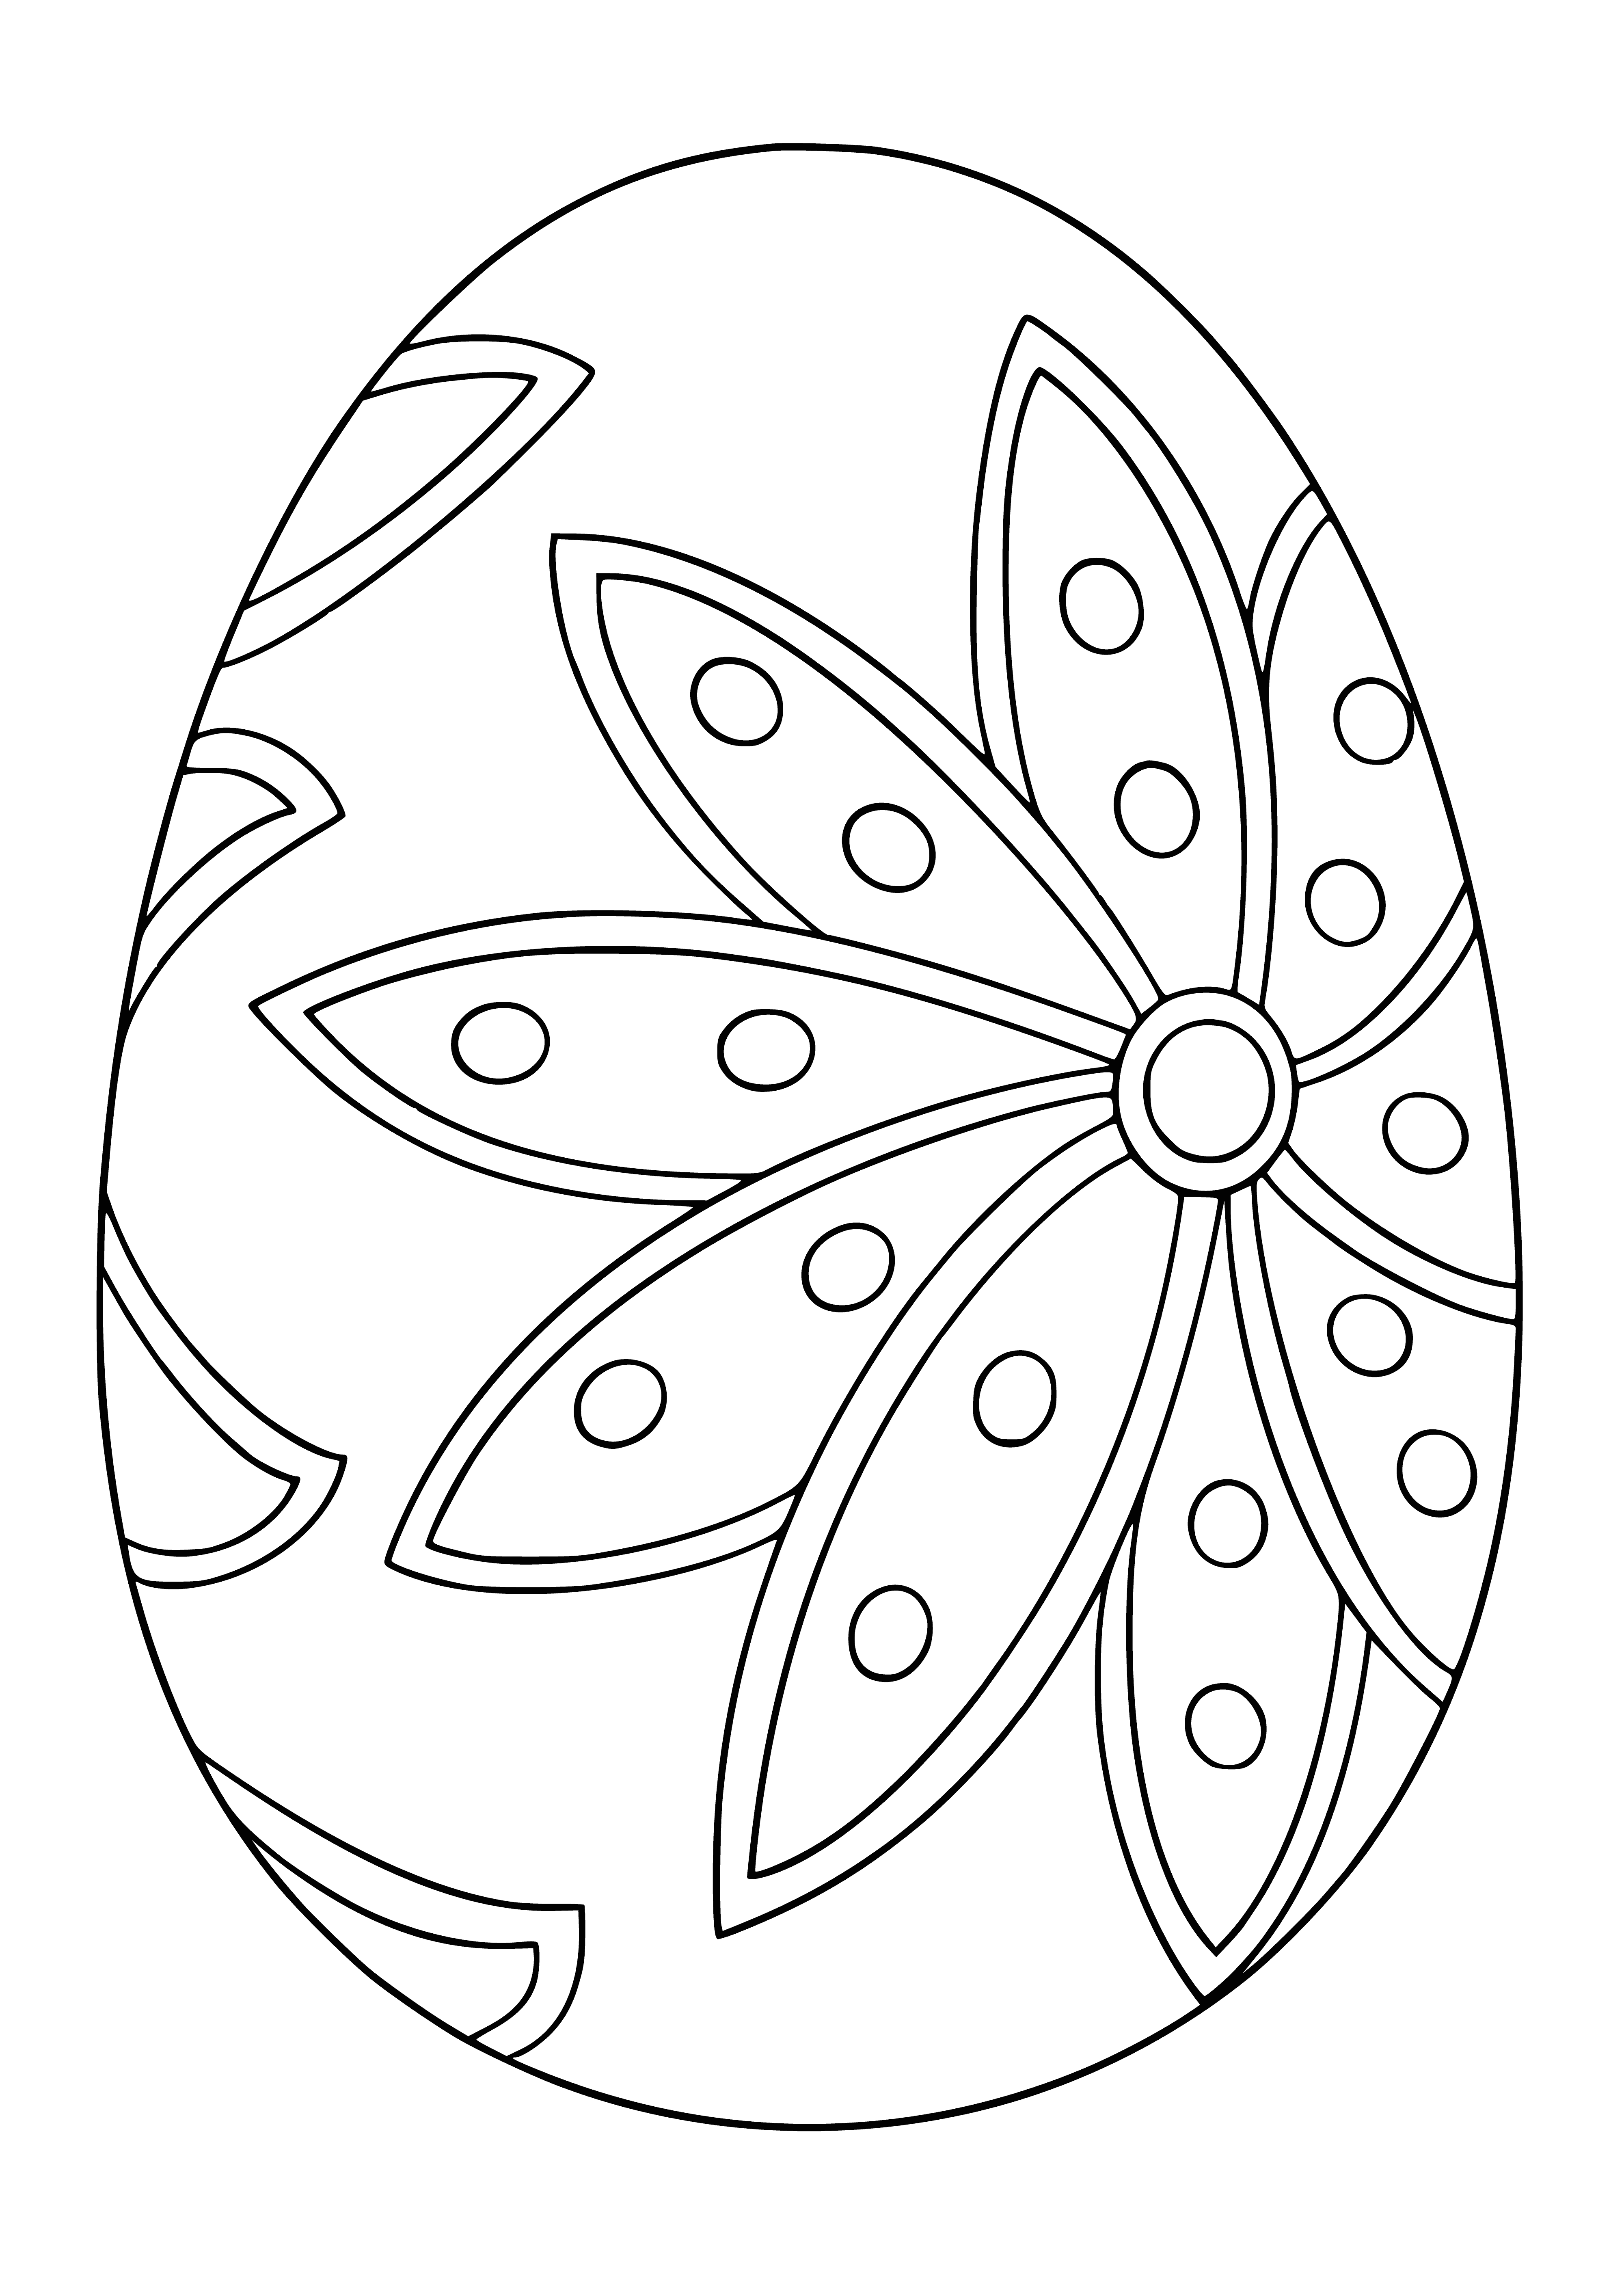 coloring page: Easter eggs are decorated eggs given for Easter, often as gifts for kids on Easter morning.